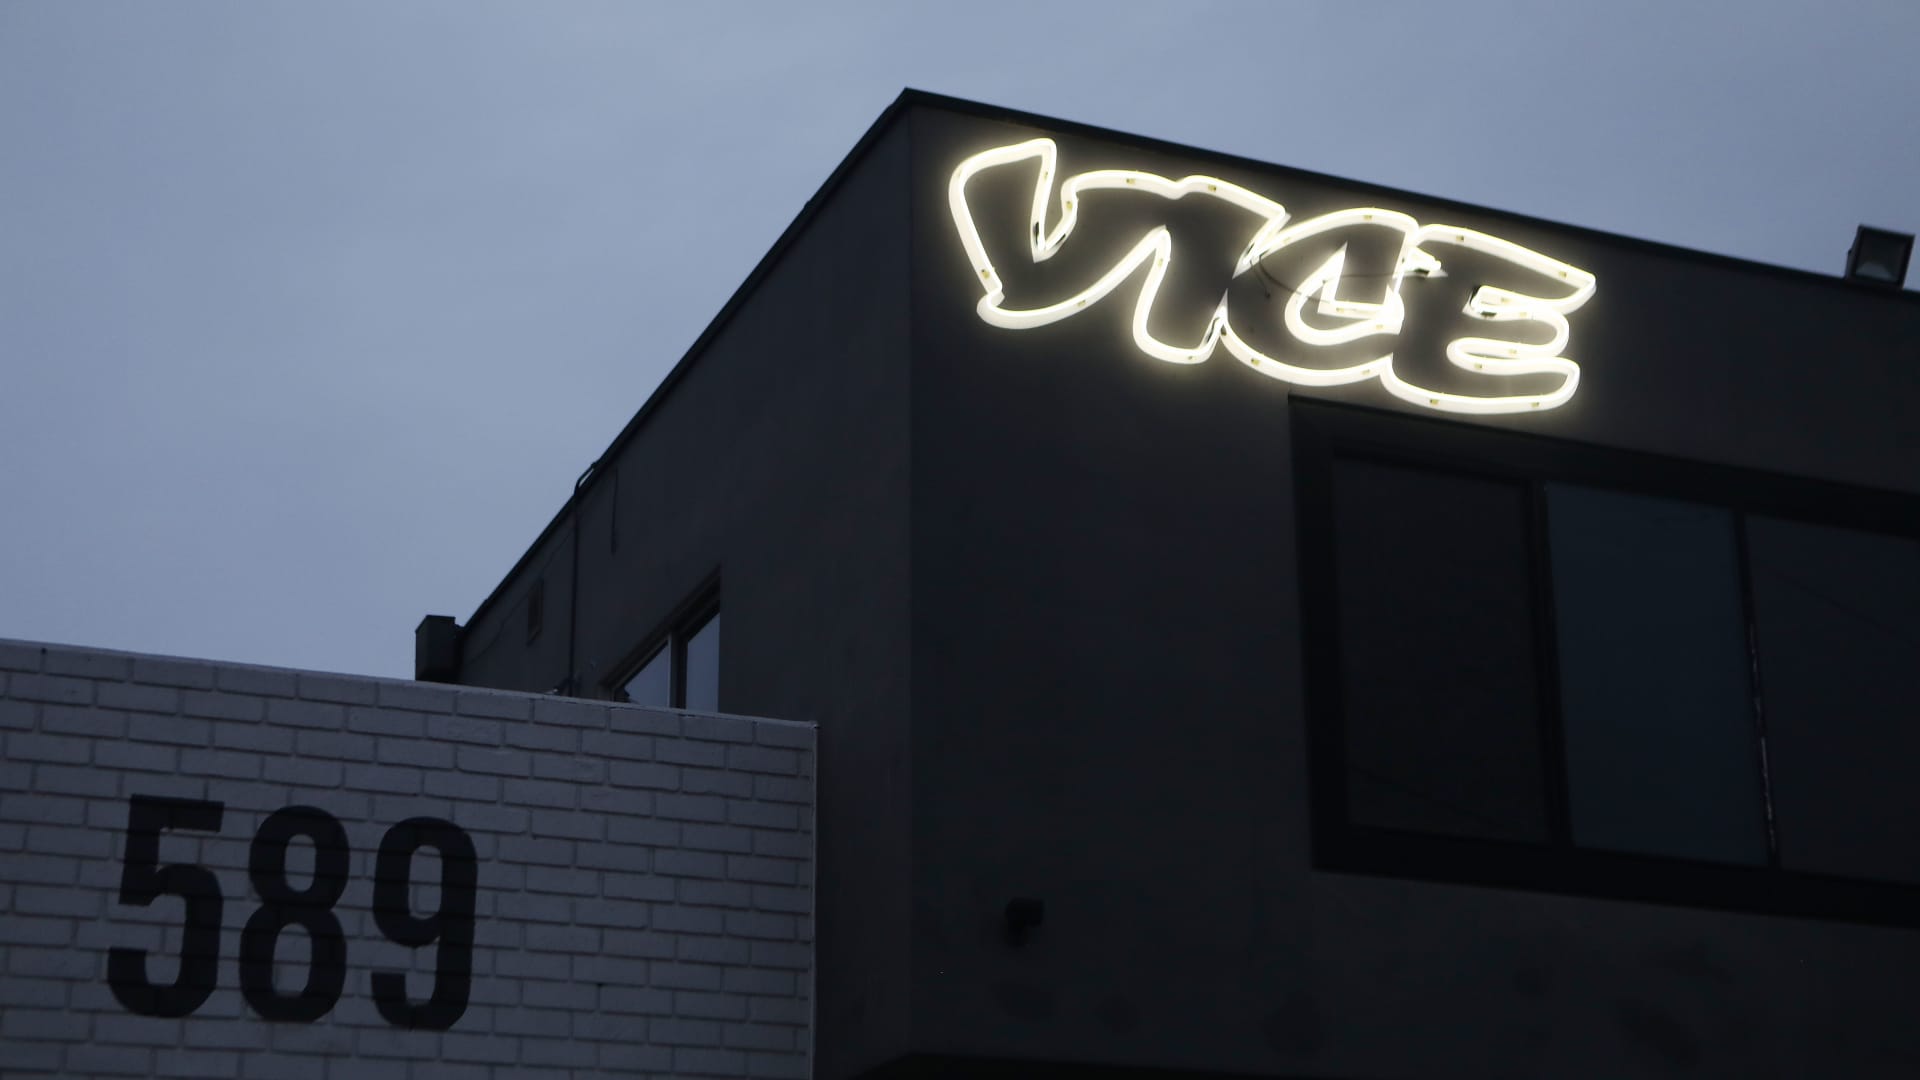 Vice Media offices display the Vice logo in Venice, California.